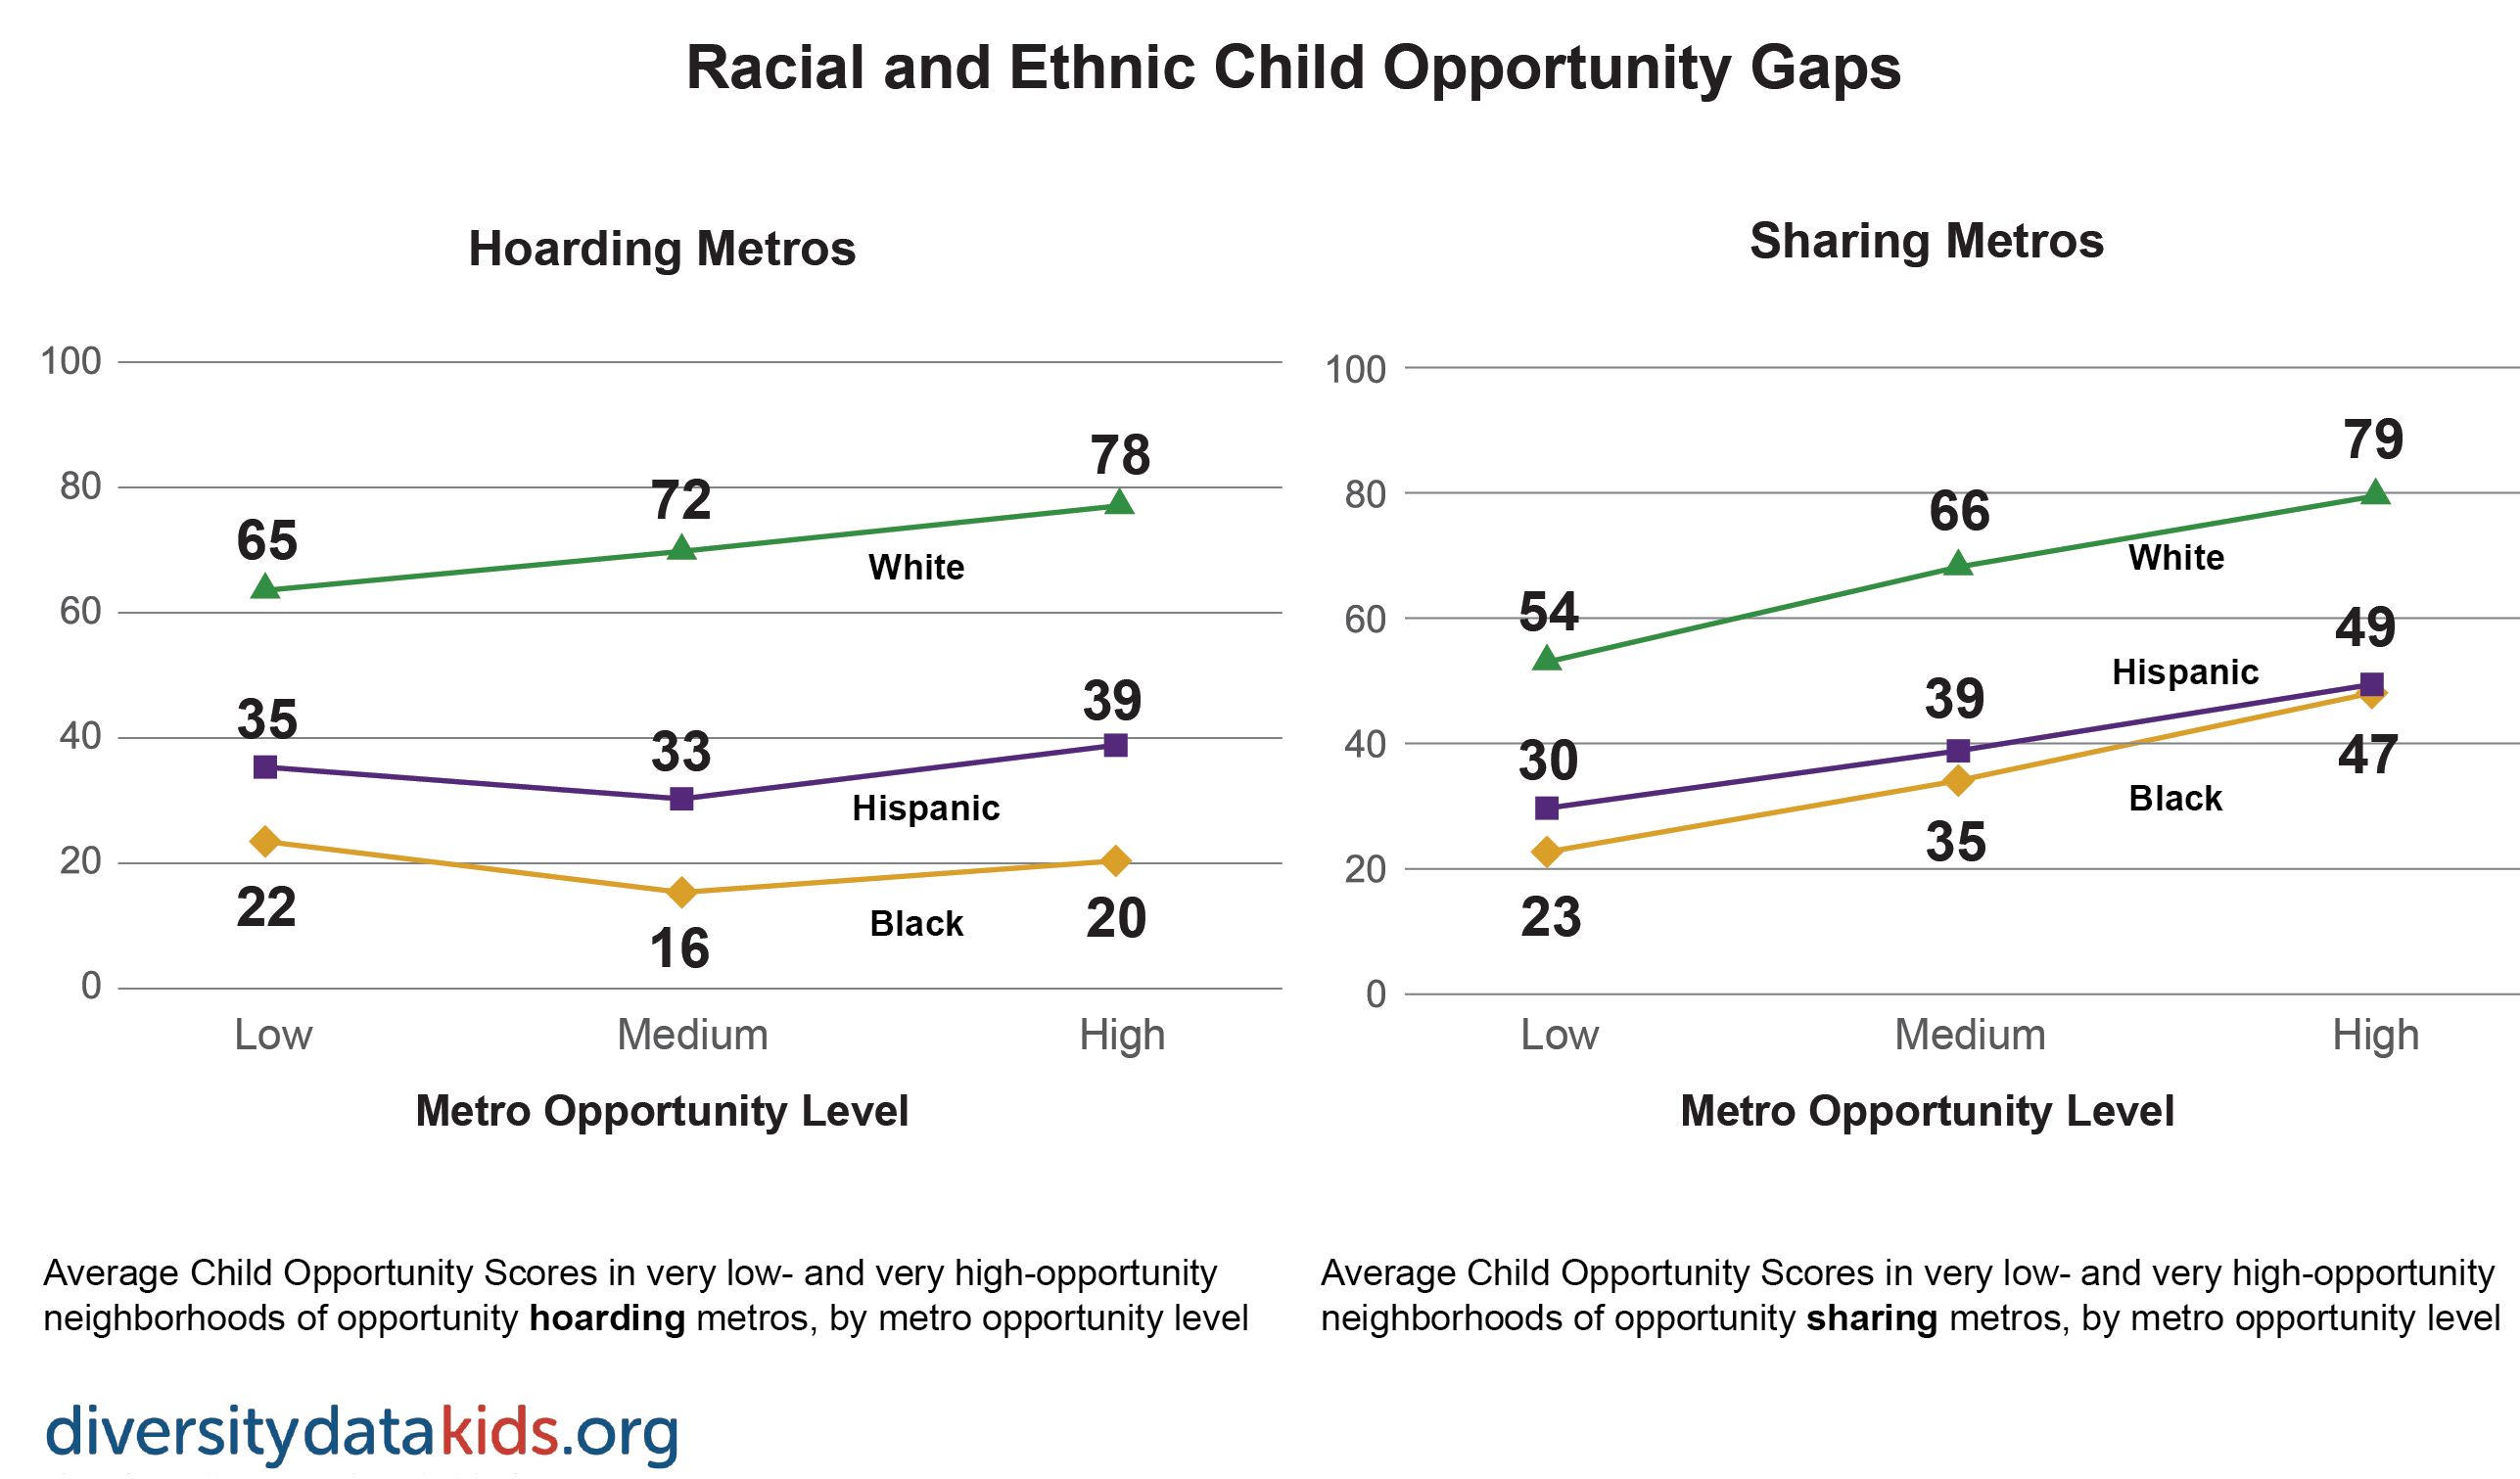 Graph showing racial-ethnic dimensions of opportunity levels in hoarding and sharing metros